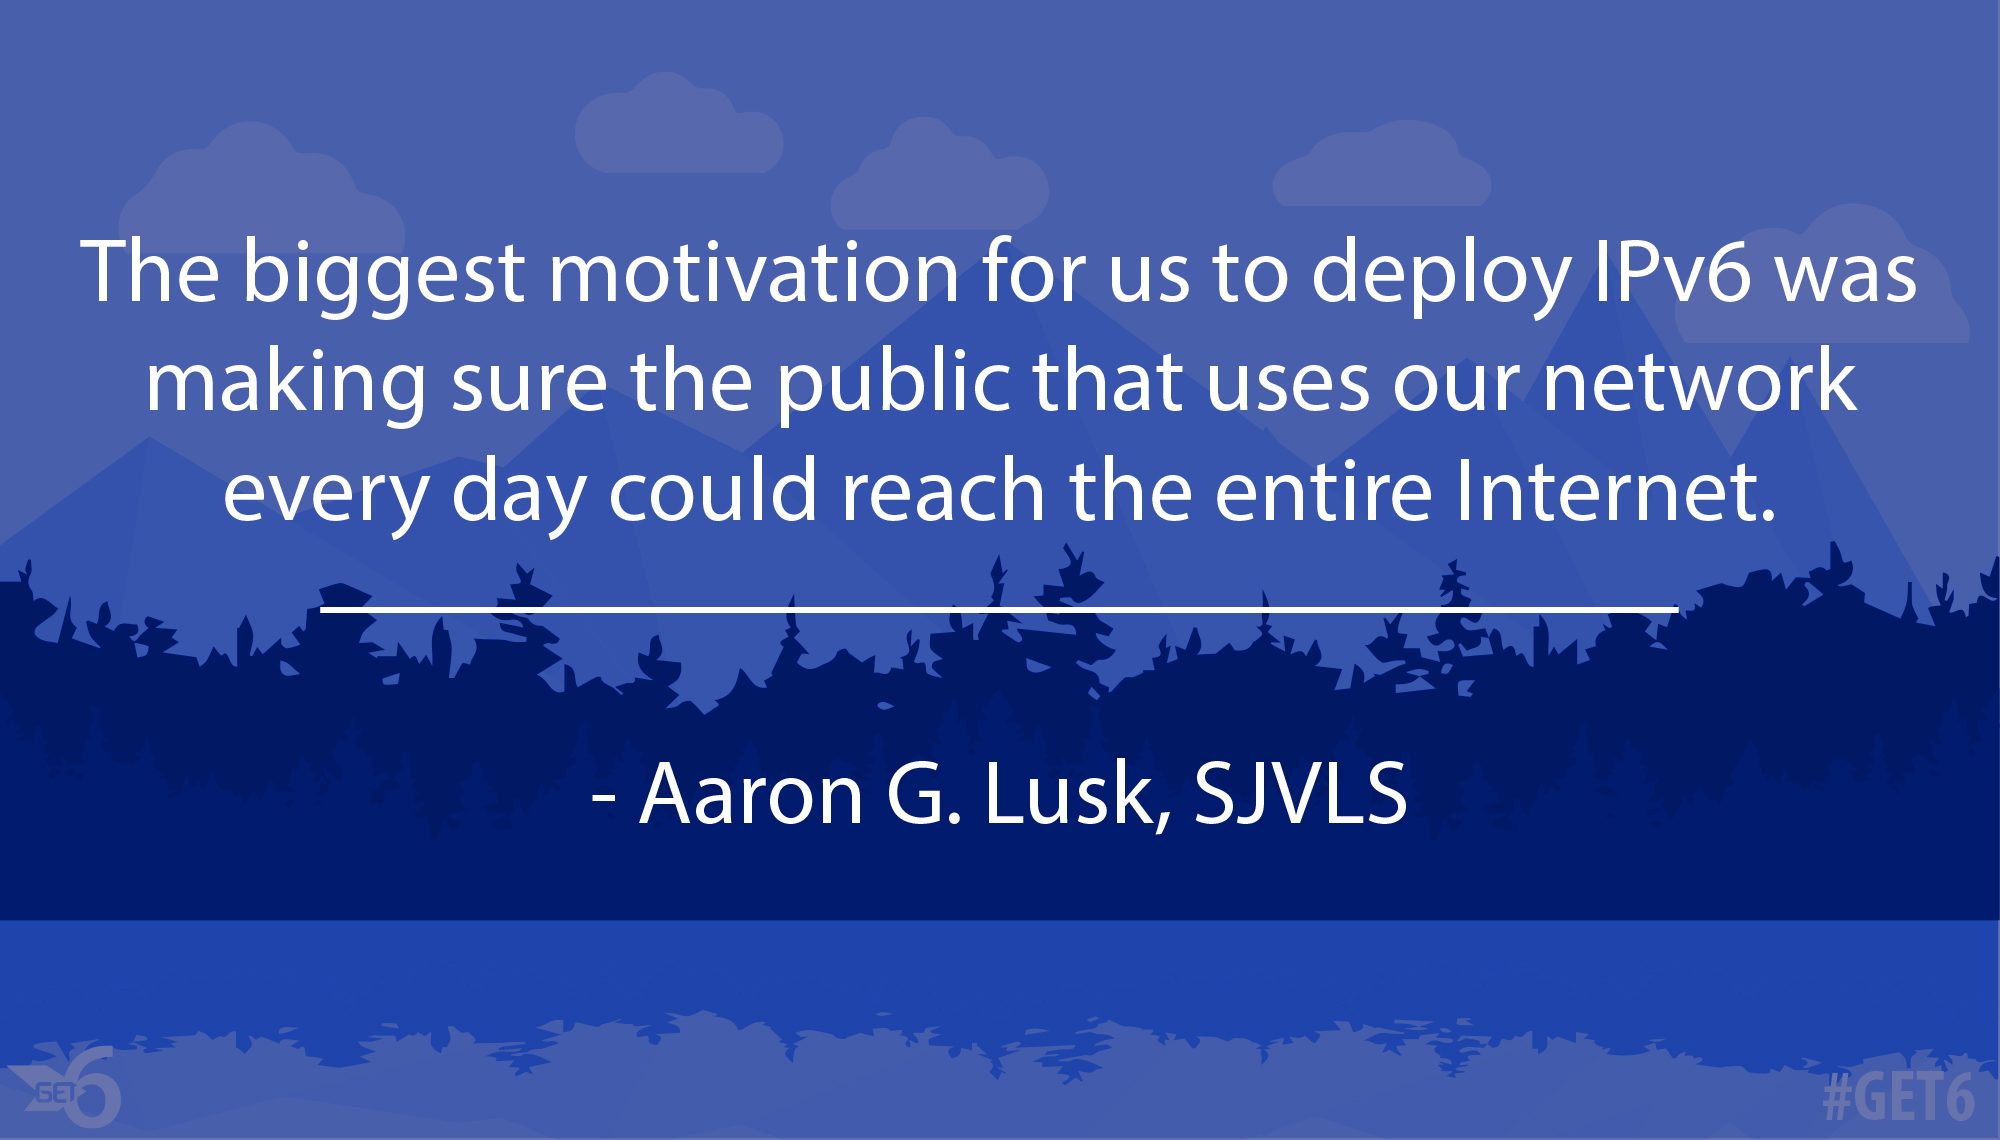 &ldquo;The biggest motivation for us to deploy IPv6 was making sure the public that uses our network everyday could reach the entire Internet.&rdquo;